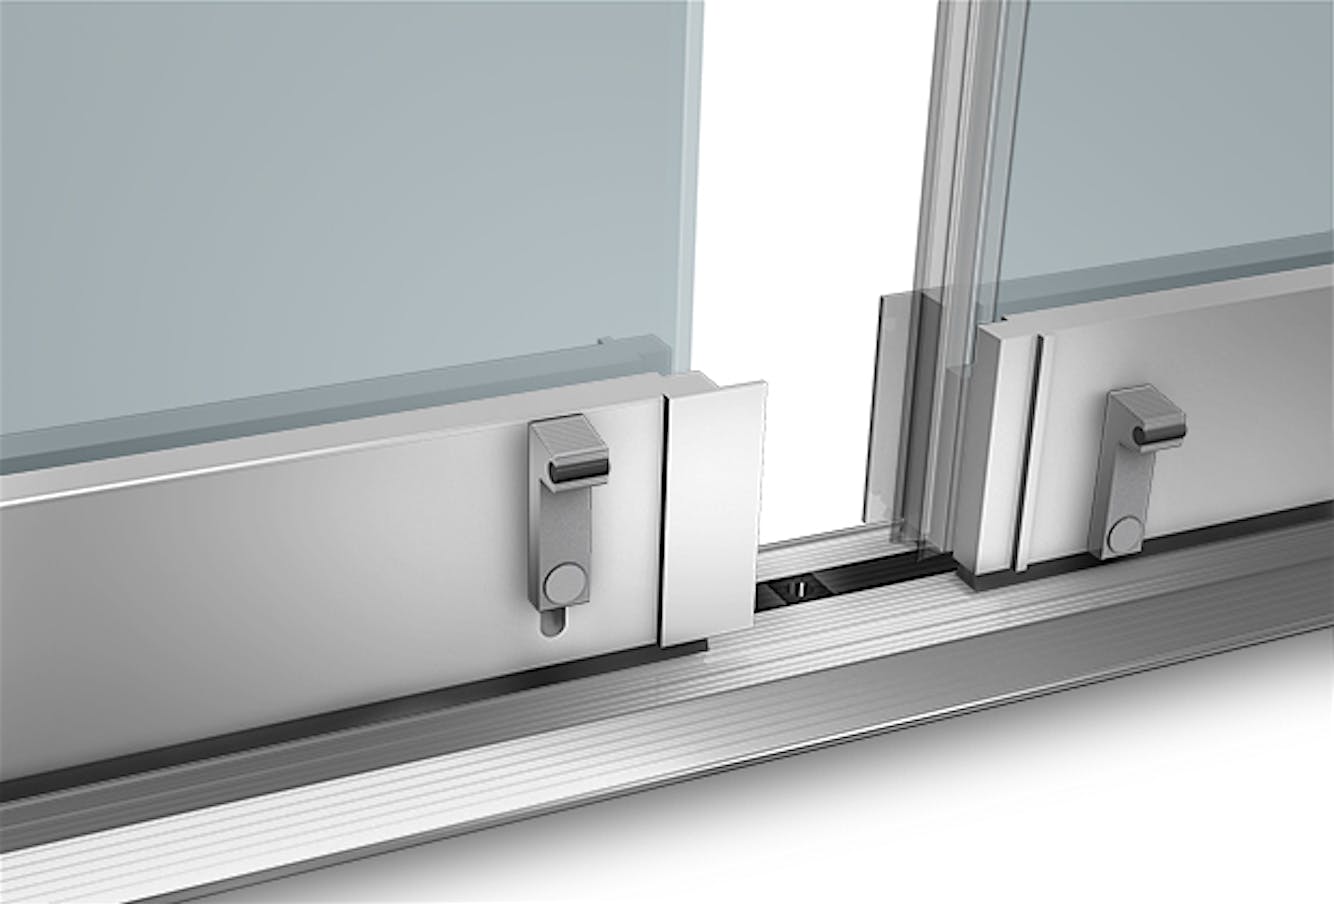 Foot Activated ADA-compliant sill